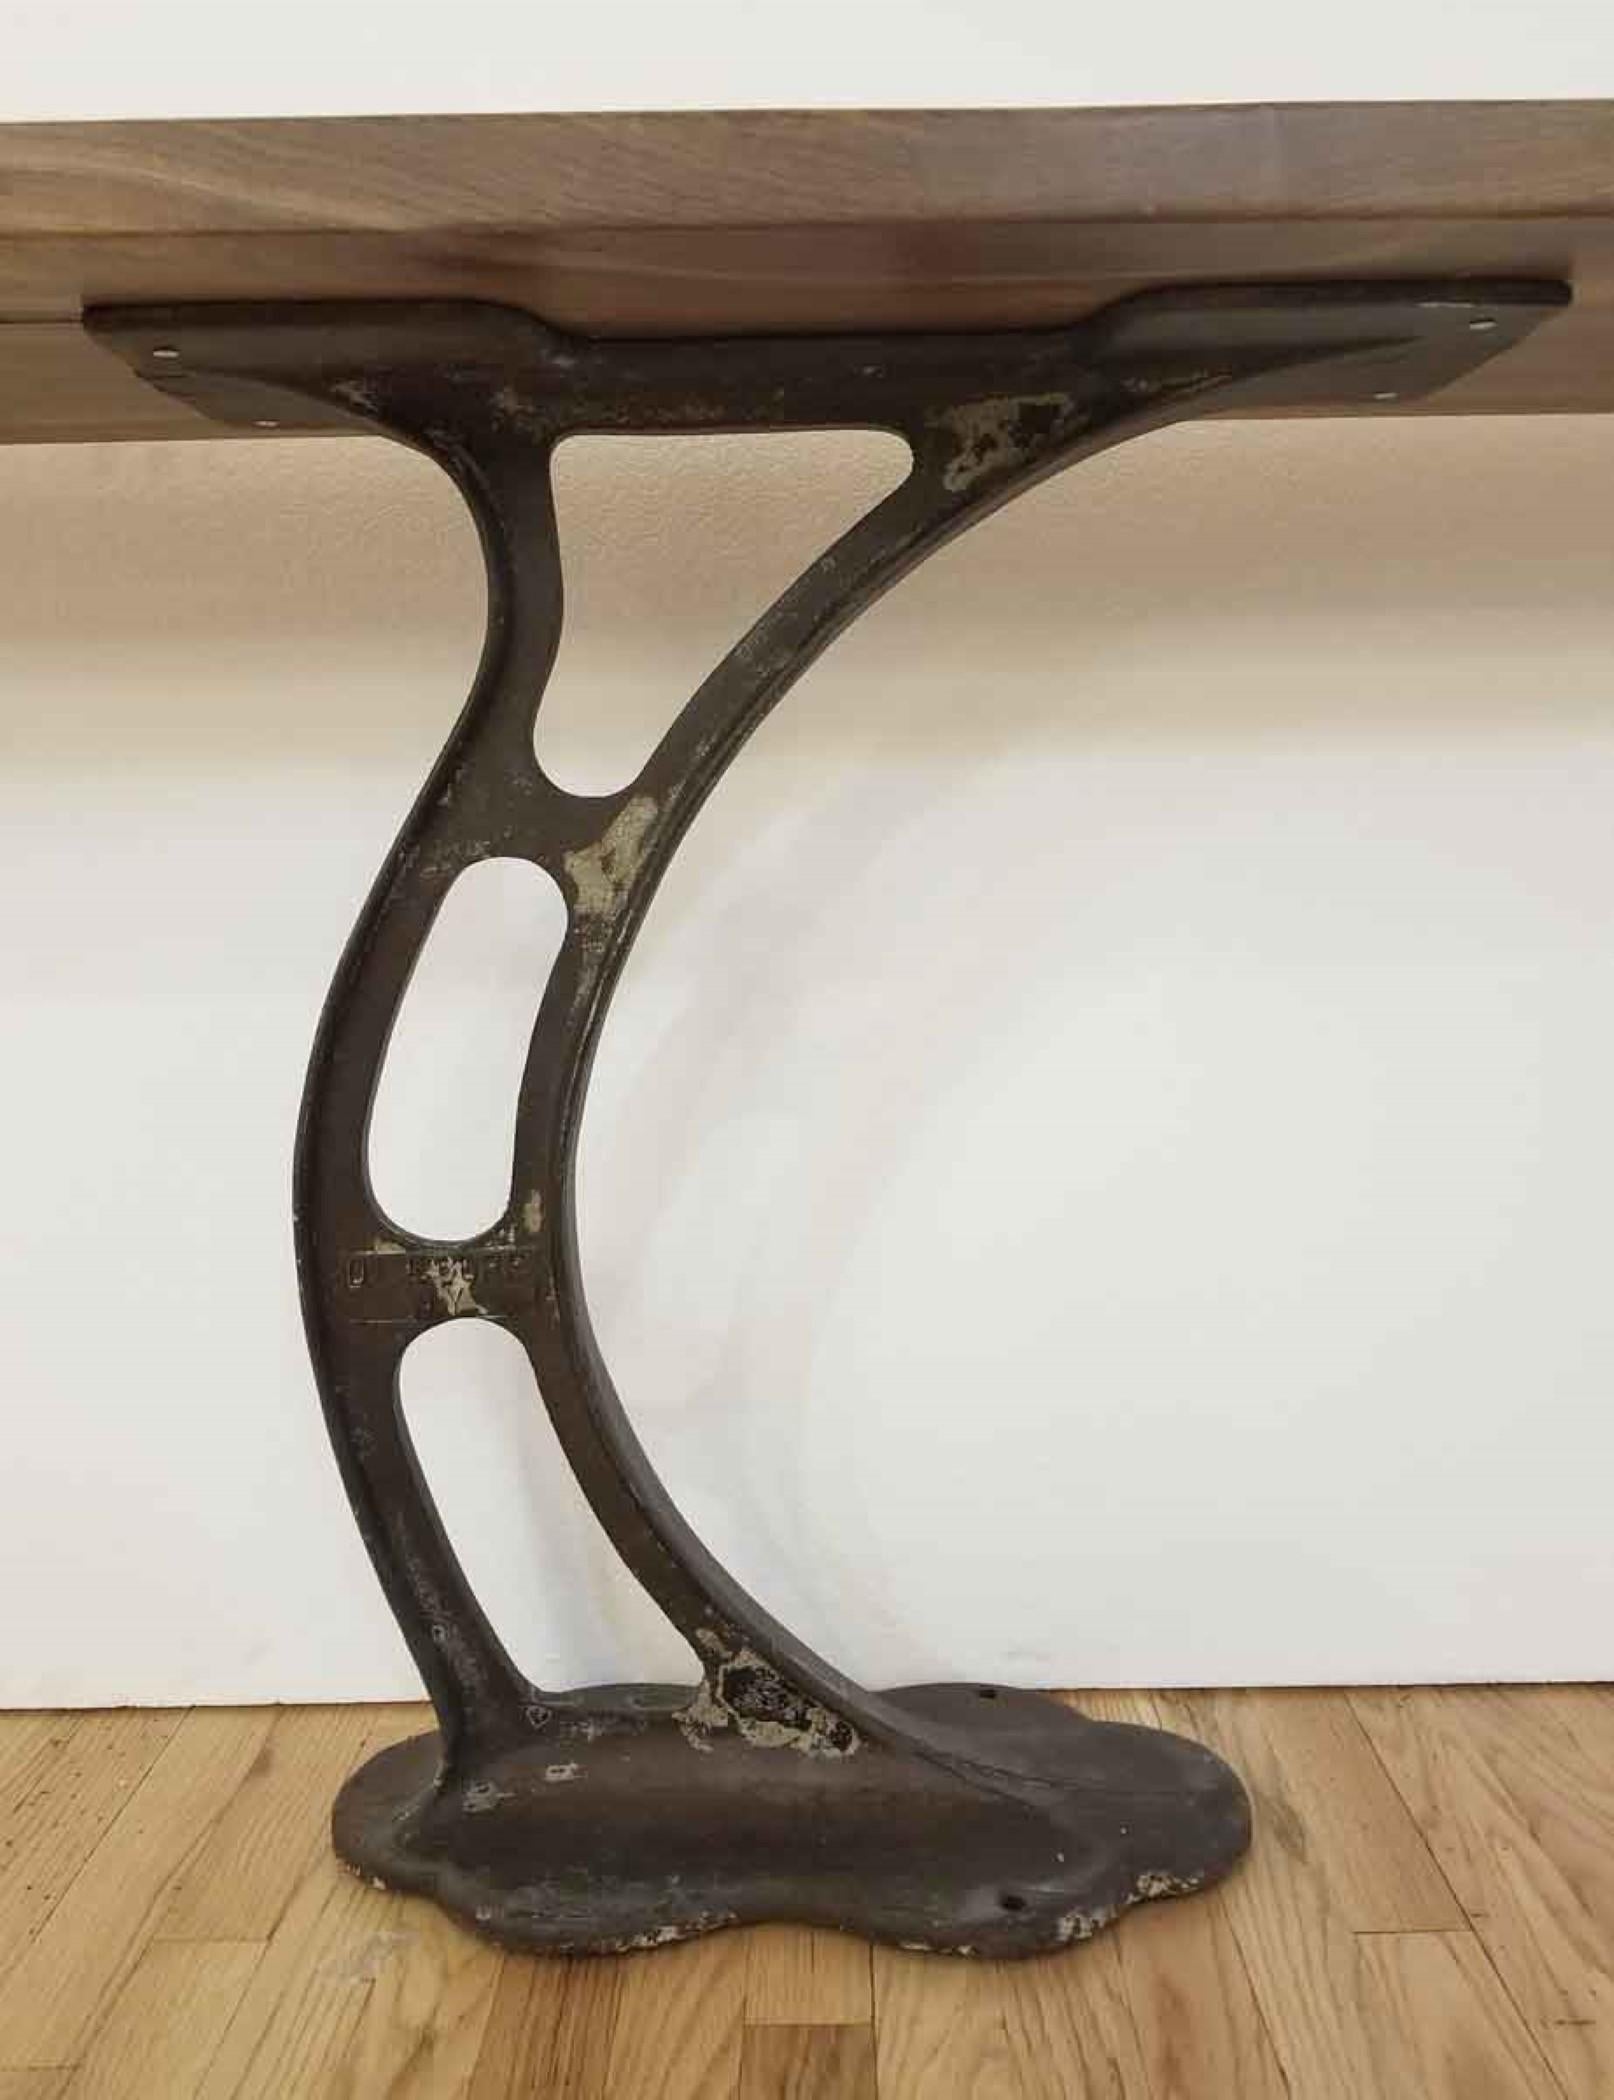 Solid Walnut Console Table with Industrial Base 1920s Cast Iron 3